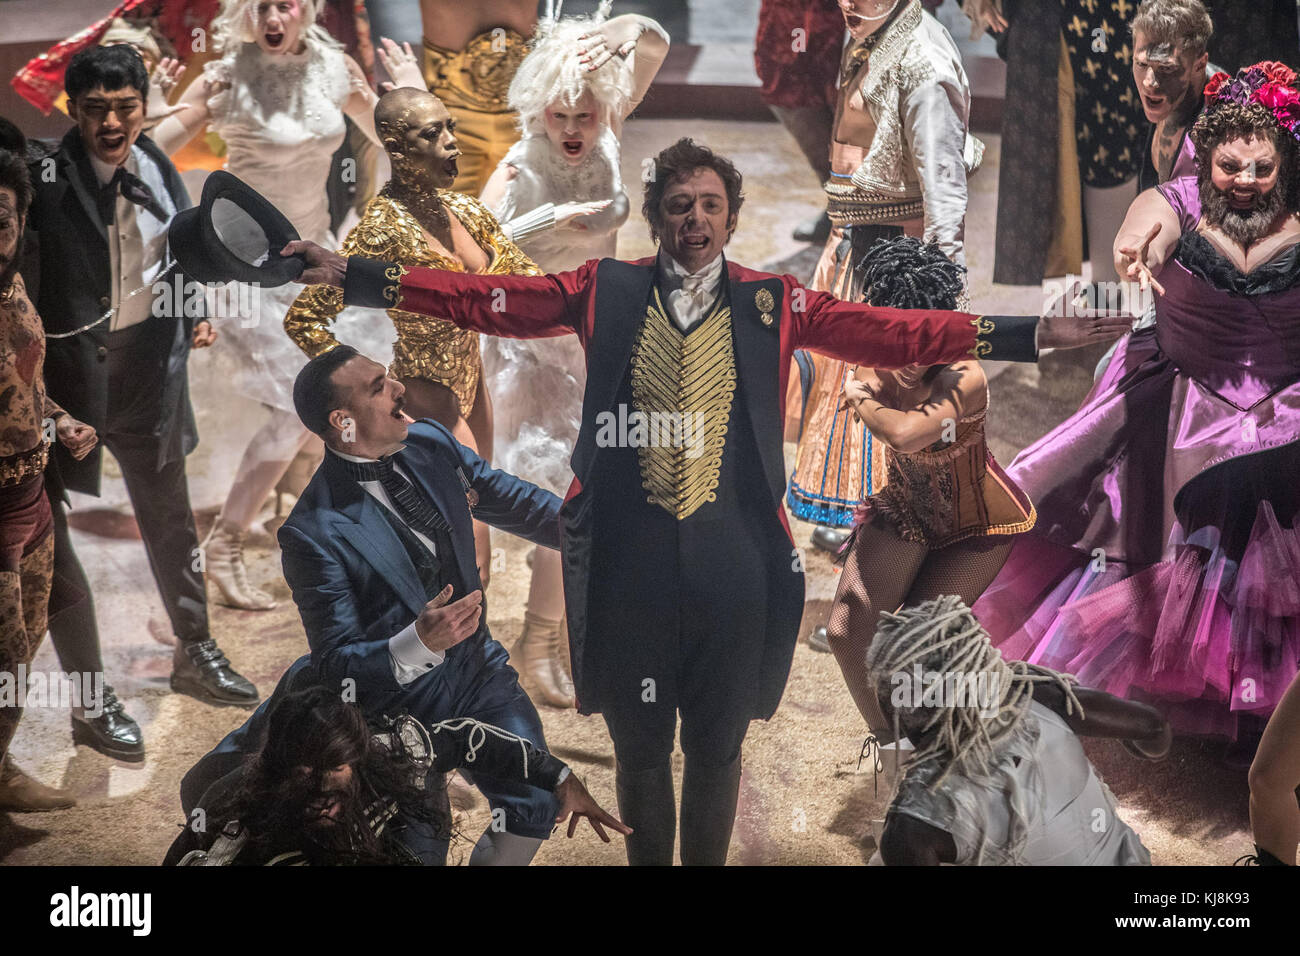 RELEASE DATE: December 2o, 2017 TITLE: The Greatest Showman STUDIO: Twentieth Century Fox DIRECTOR: Michael Gracey PLOT: Inspired by the imagination of P.T. Barnum, The Greatest Showman is an original musical that celebrates the birth of show business and tells of a visionary who rose from nothing to create a spectacle that became a worldwide sensation.STARRING: HUGH JACKMAN as Barnum. (Credit Image: © Twentieth Century Fox/Entertainment Pictures) Stock Photo